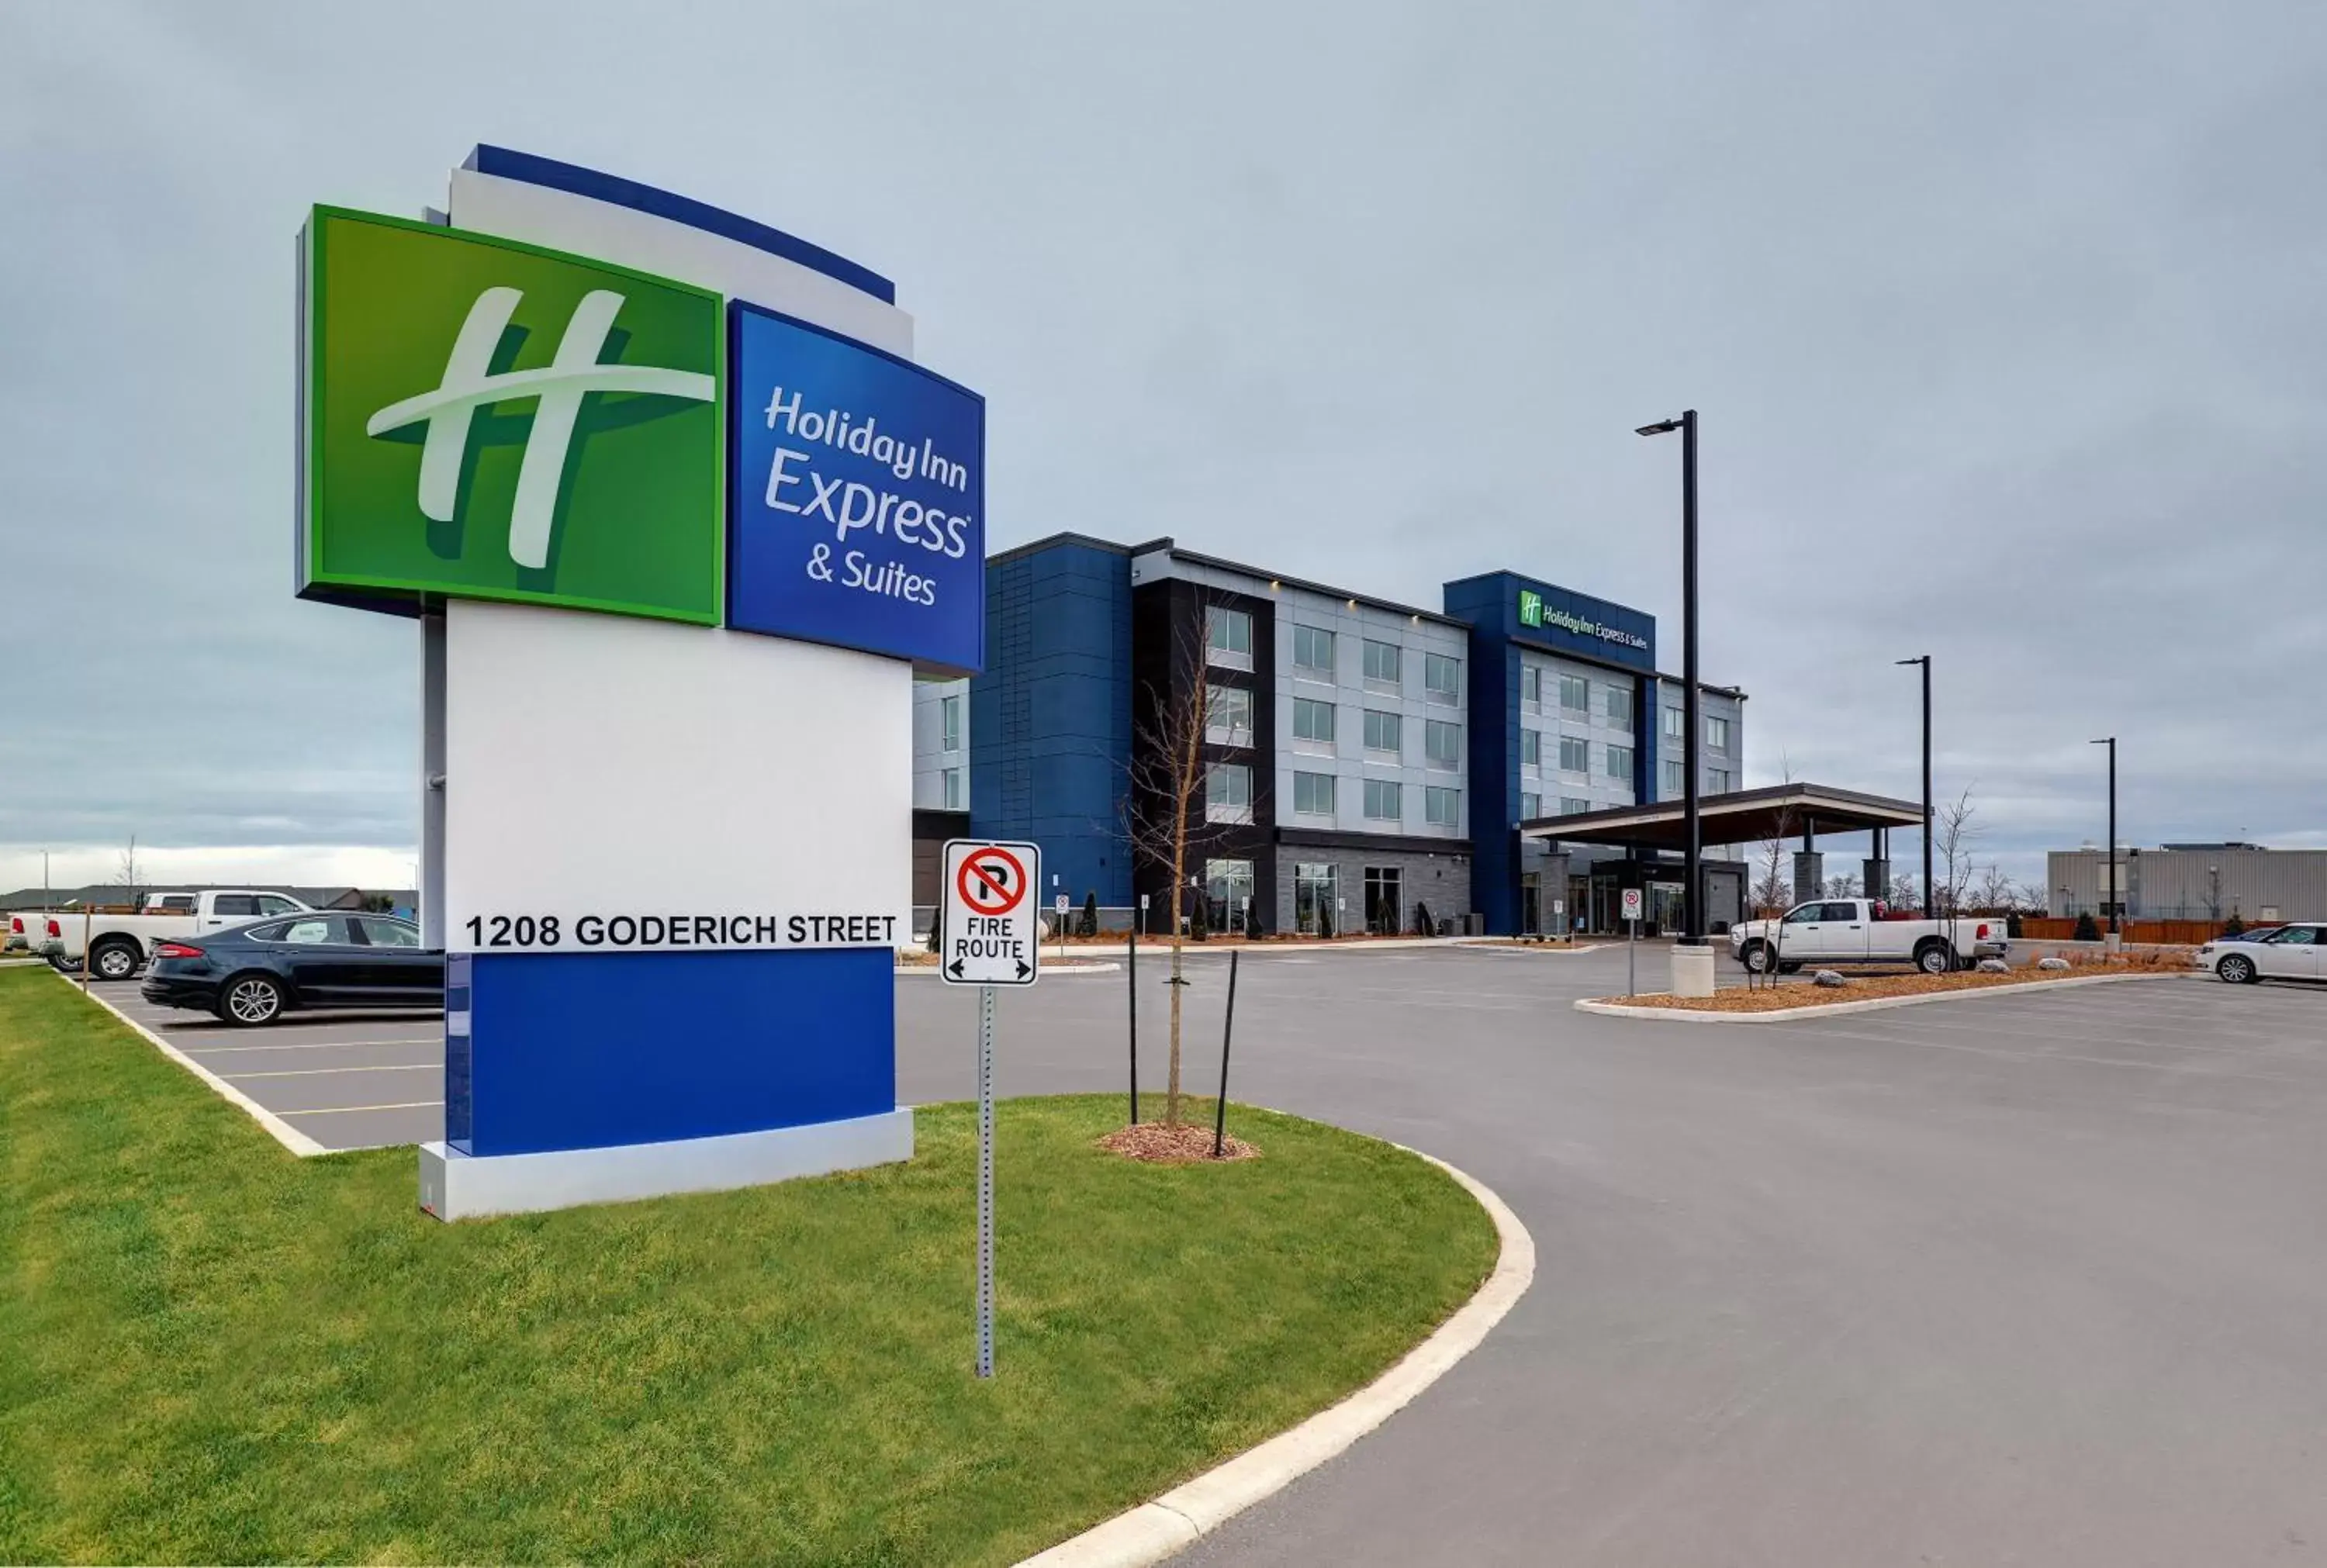 Property building in Holiday Inn Express & Suites - Port Elgin